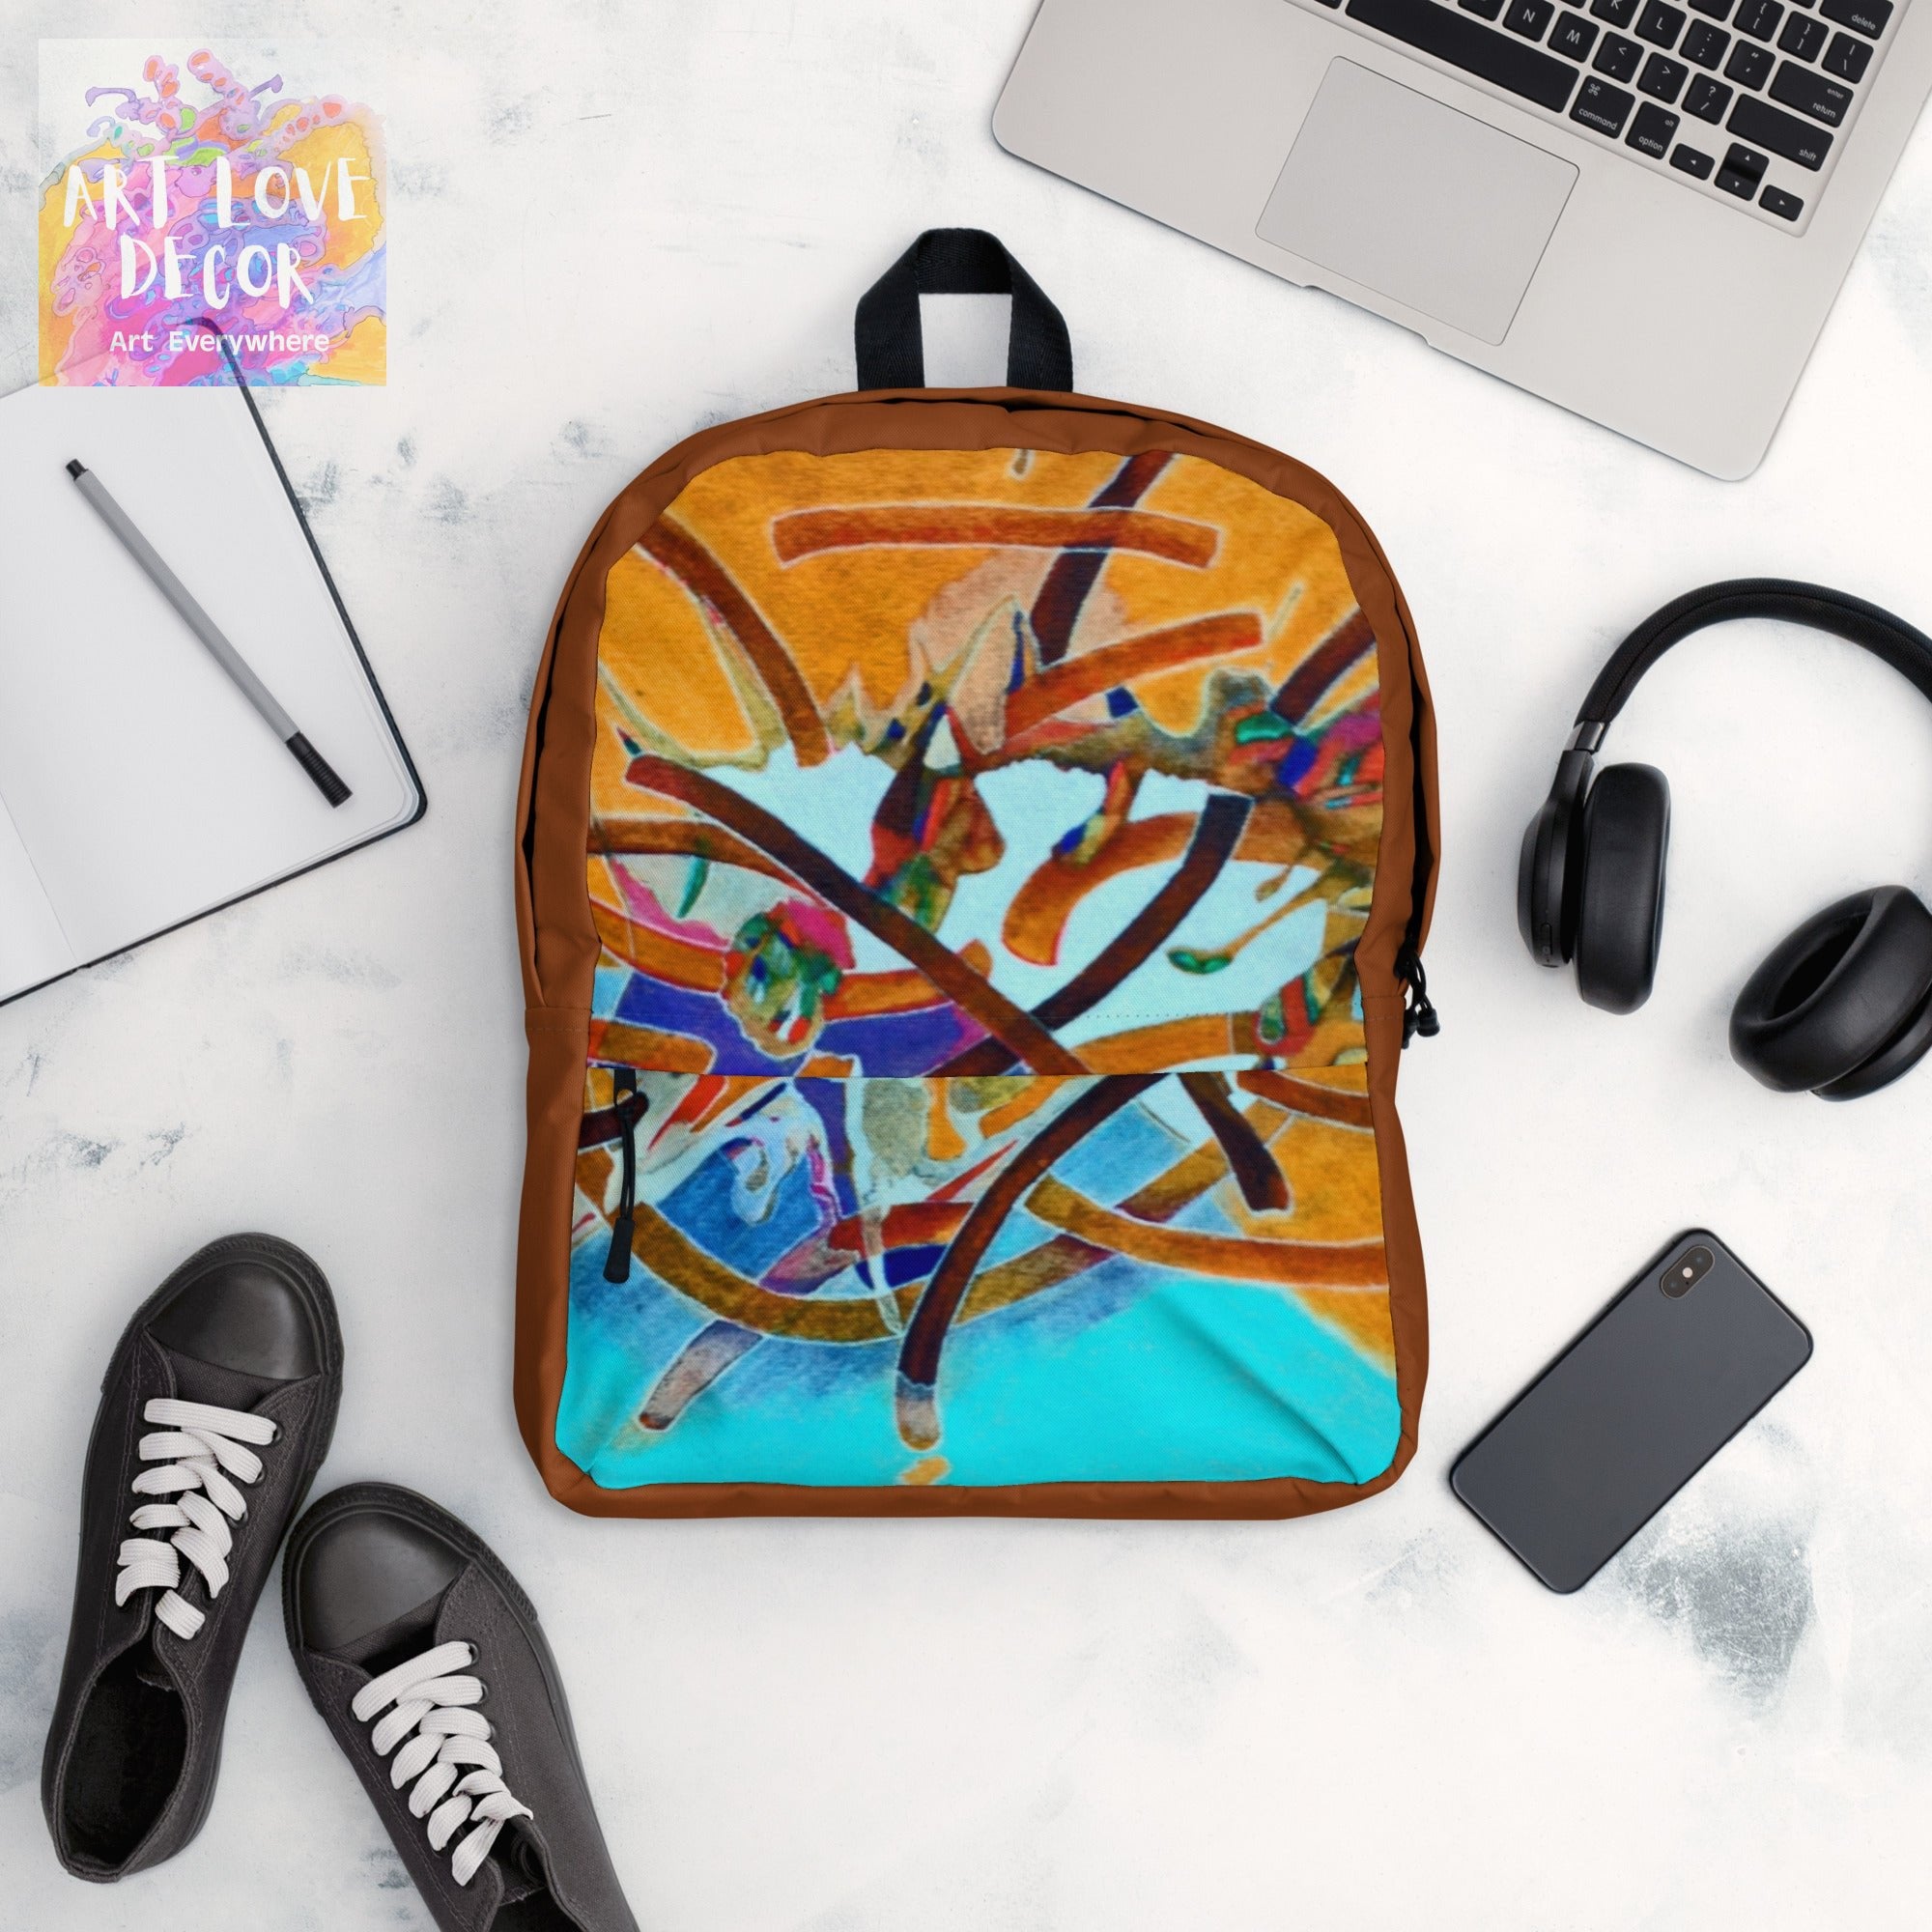 Unexpected Abstract Backpack - Art Love Decor